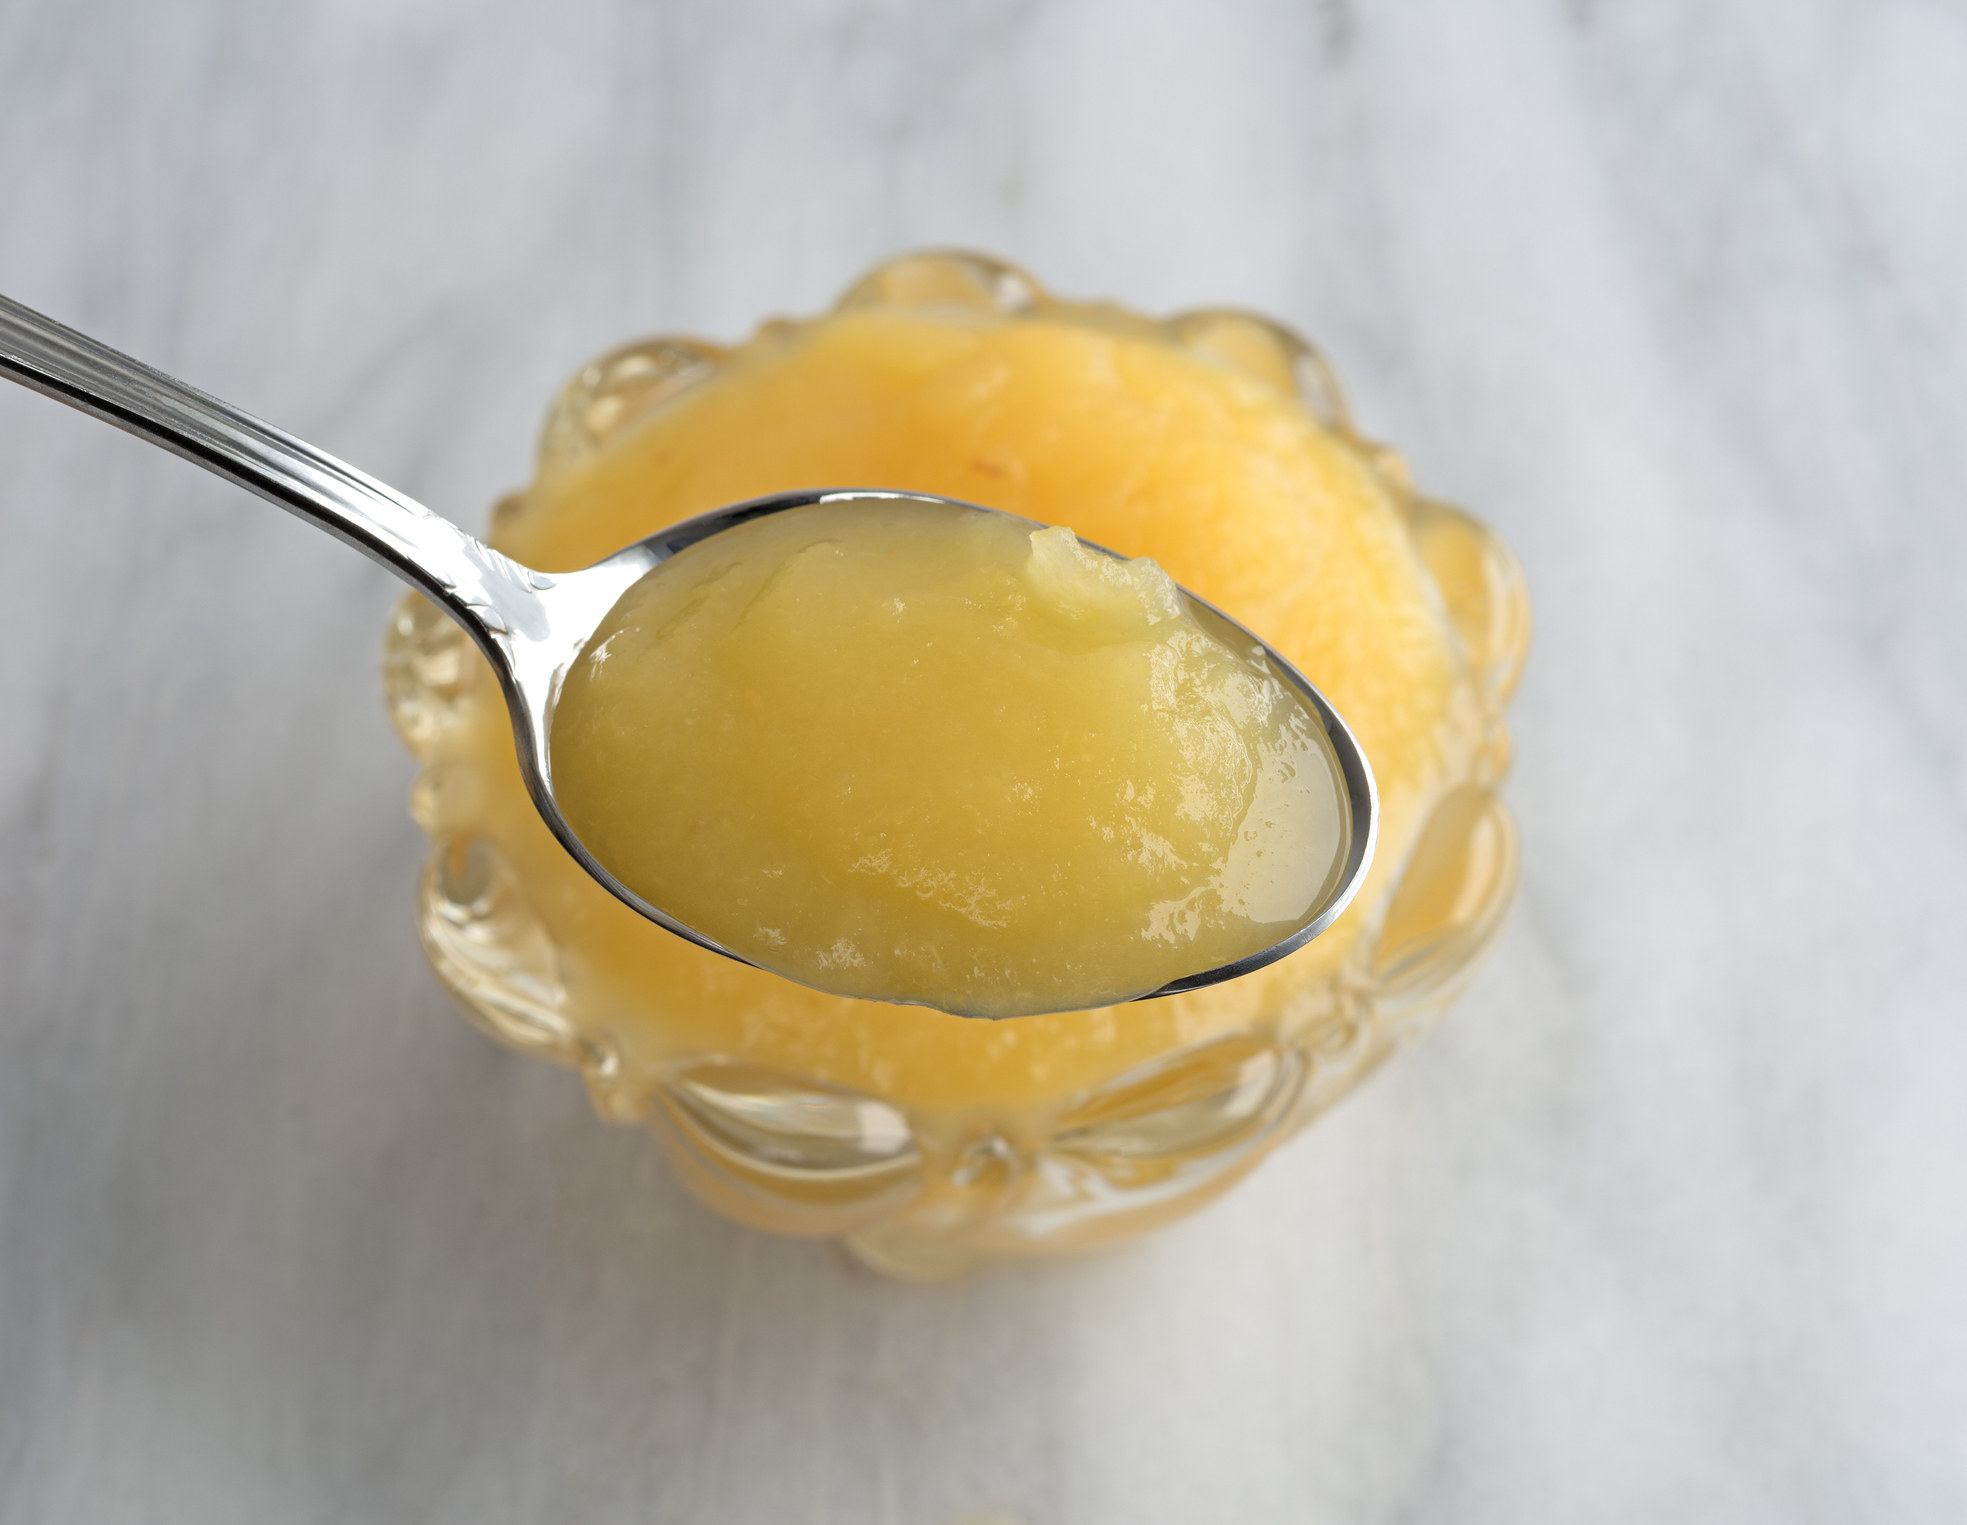 A spoonful of apple sauce.